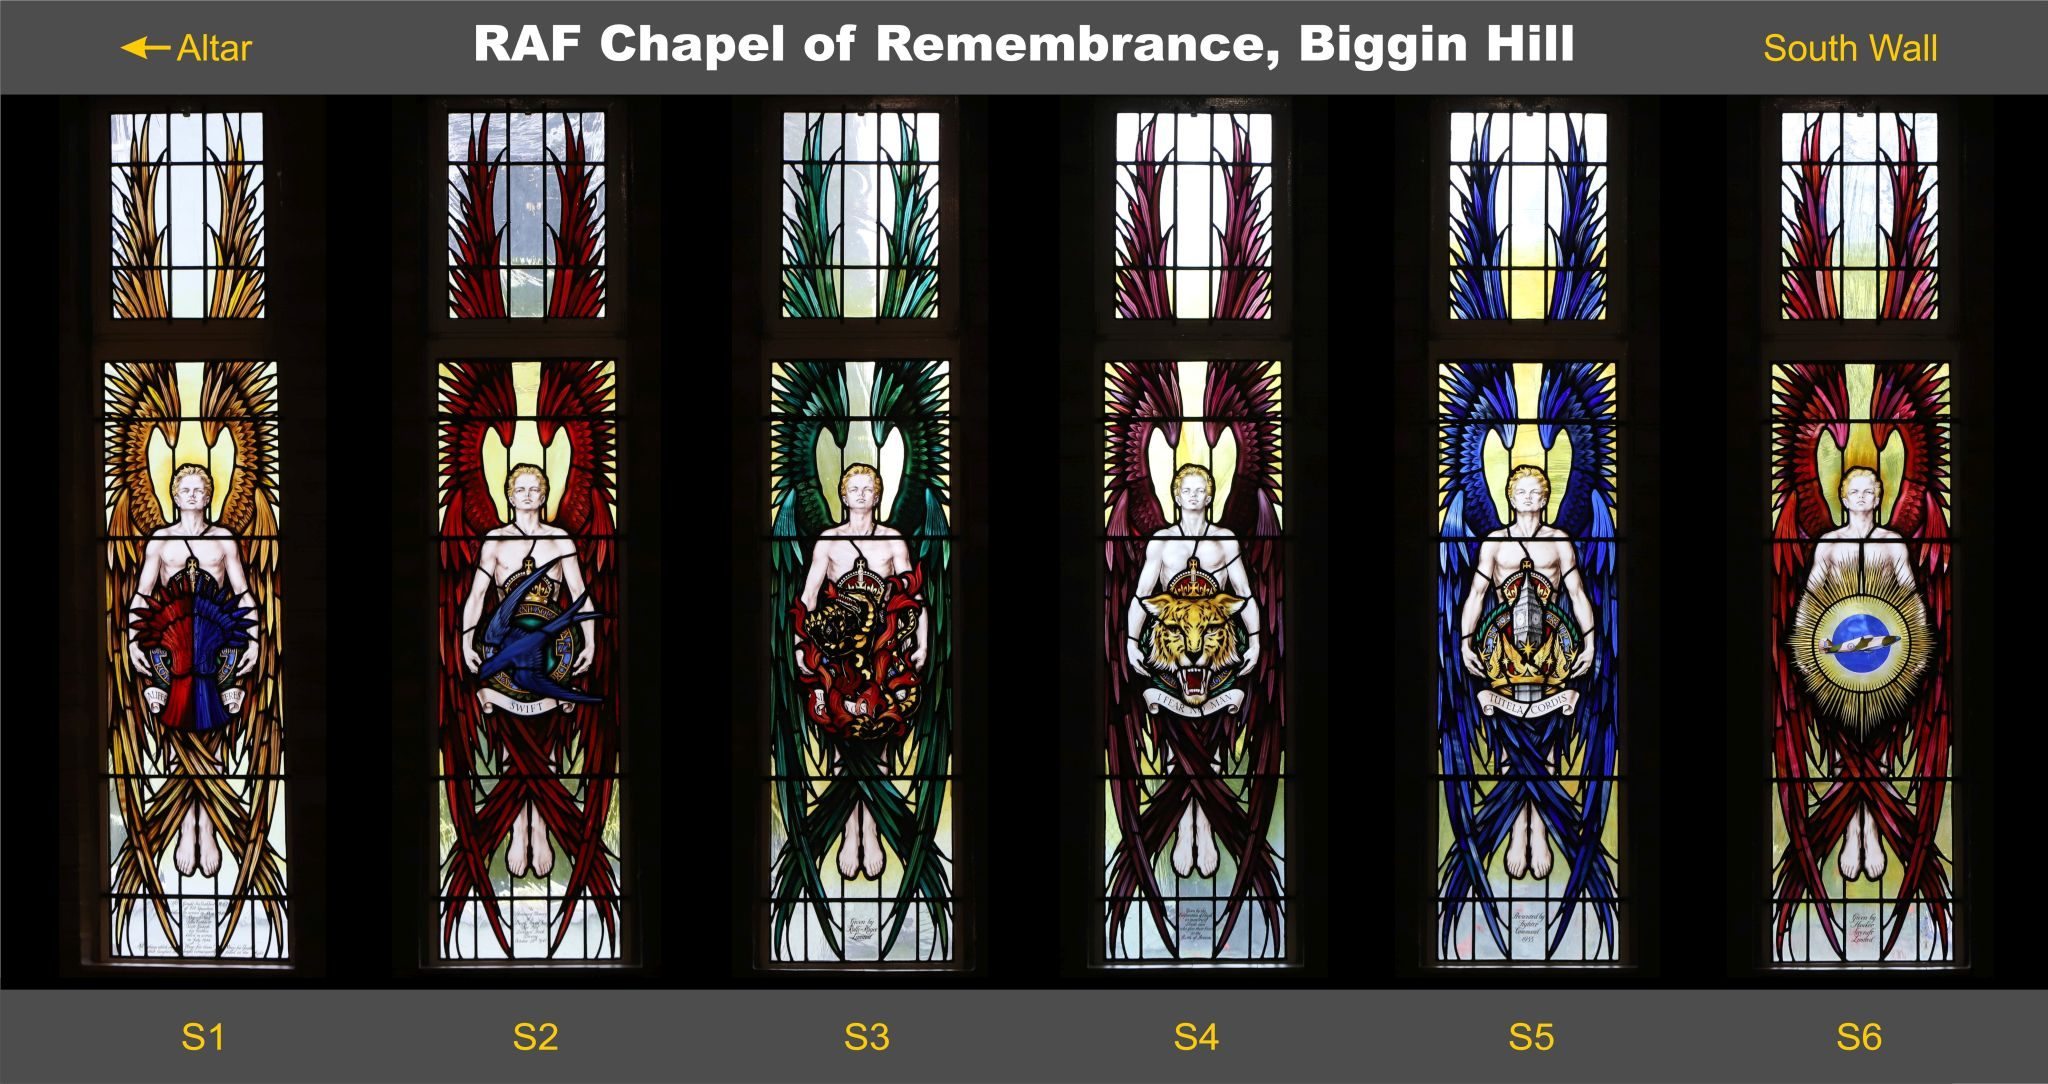 Stained glass window composite group photograph, Biggin Hill RAF Memorial Chapel. Royal Air Force, World War Two Battle of Britain. 03-Mar-2023. 3rd March 2023.